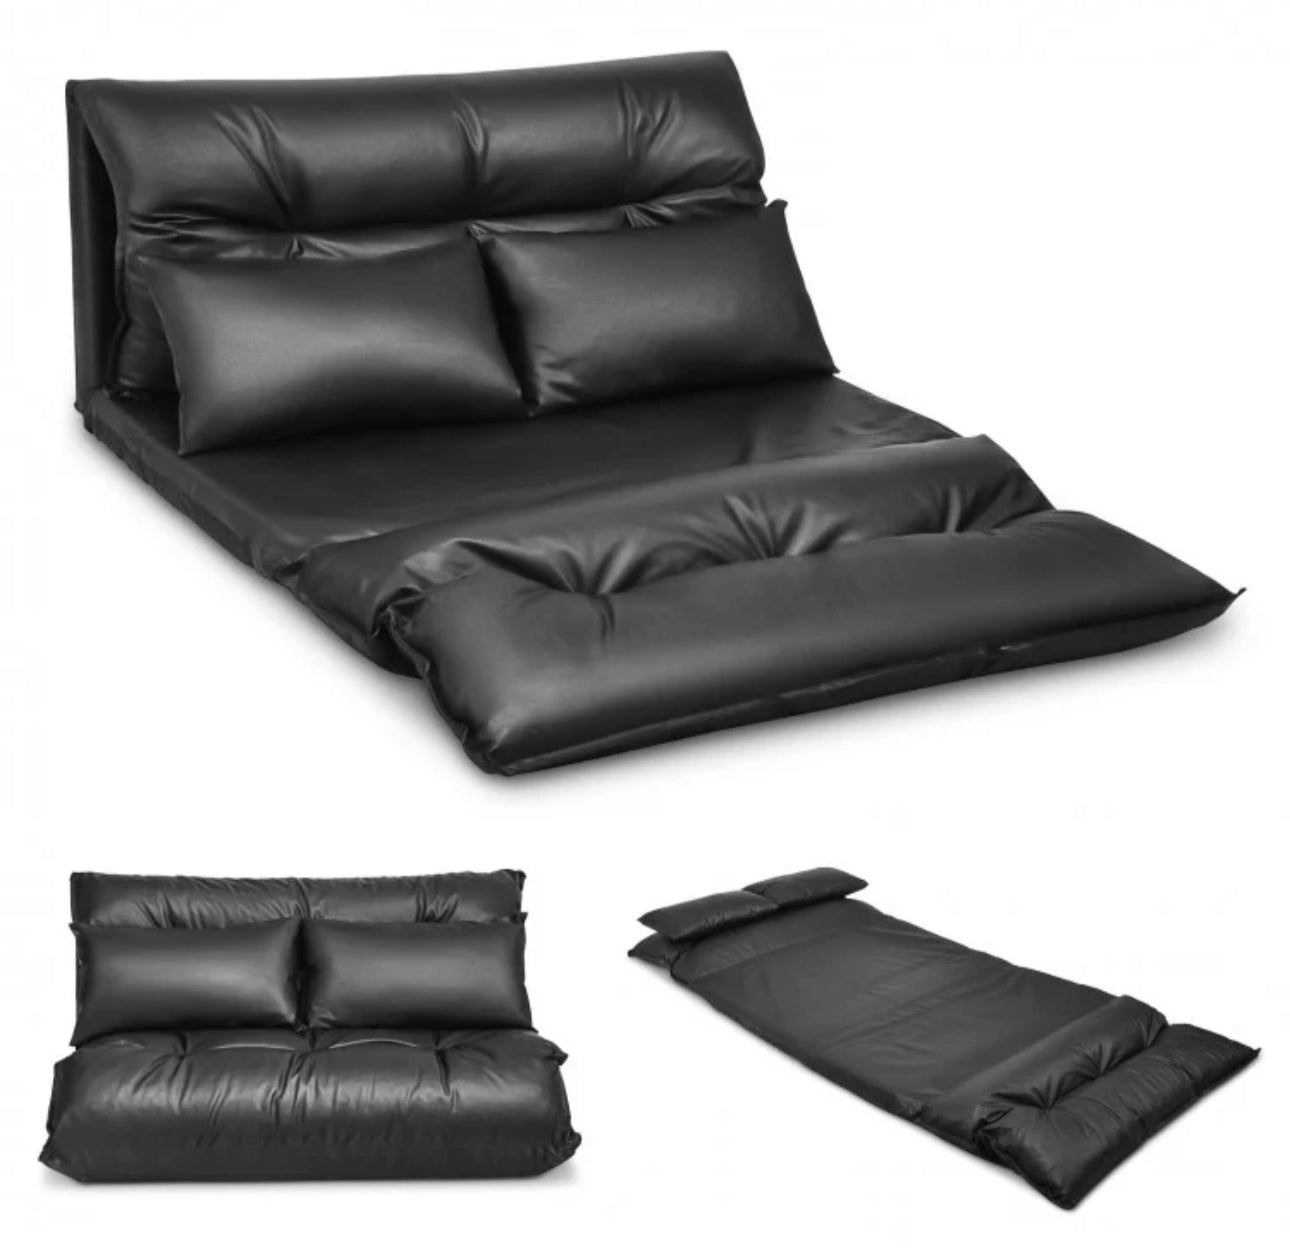 Heavy Duty Modern Foldable PU Leather Leisure Floor Comfortable Sofa Bed With 2 Thick Comfy Pillows | 3-in-1 Design | 5 Adjustable Positions